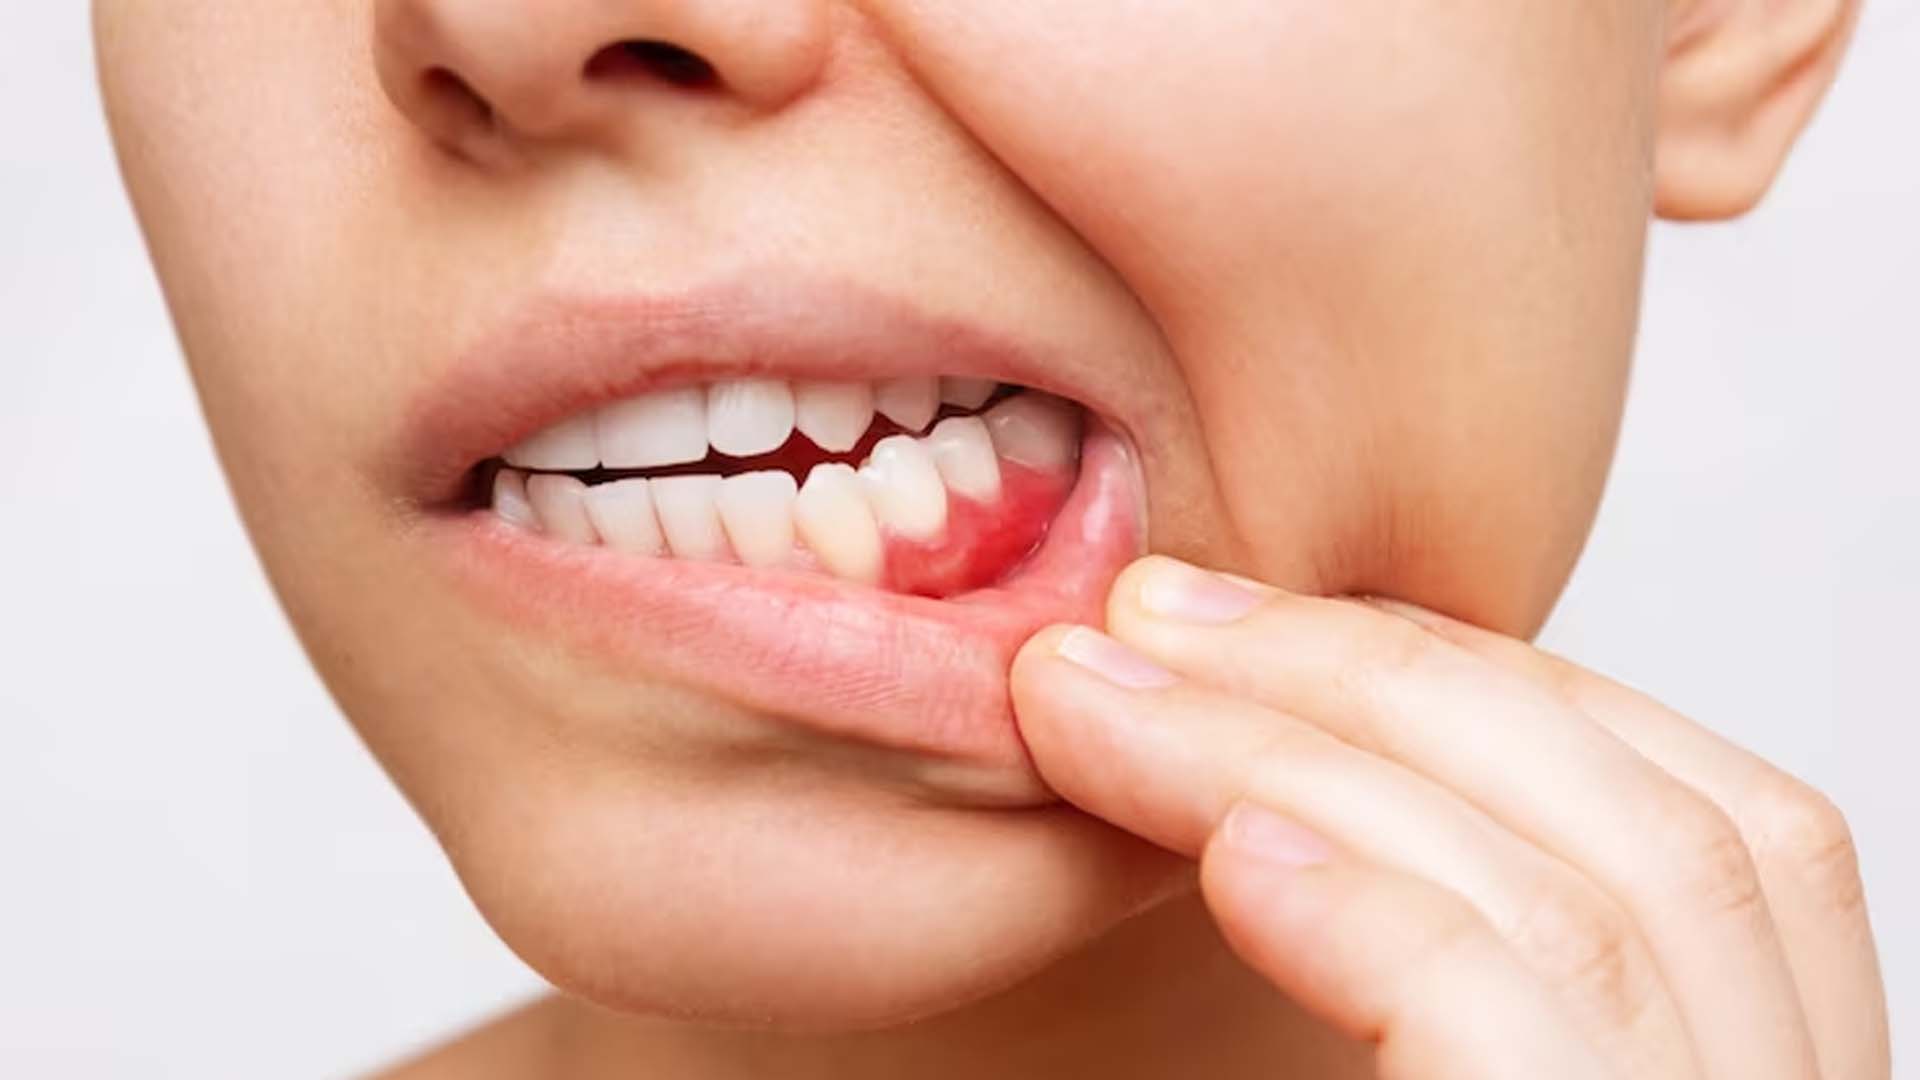 Gum swelling or gum inflammation